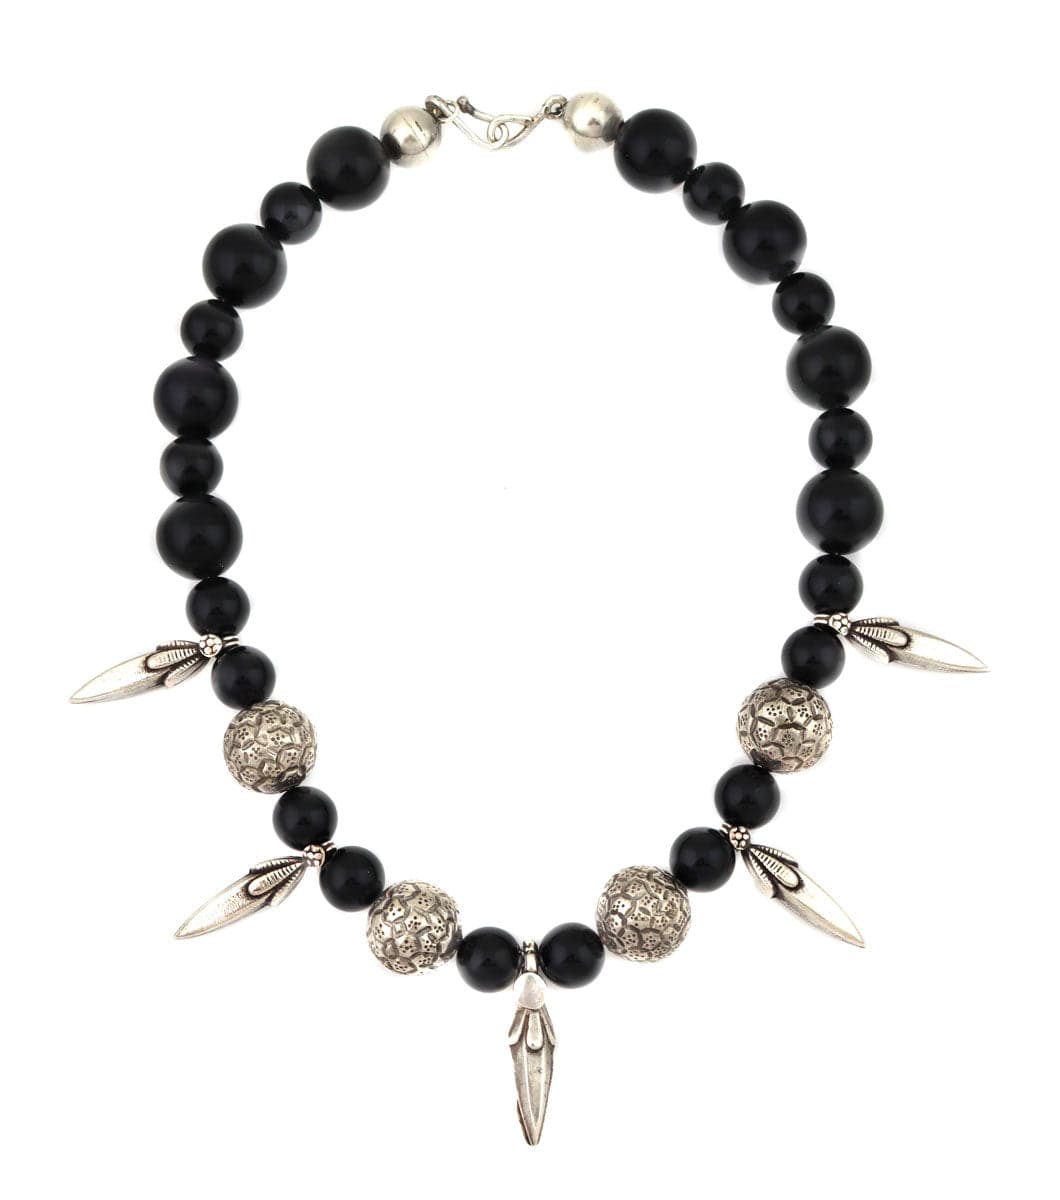 Miramontes - Necklace with 9 Carved Beads and Stylized Blossoms on Onyx Beads, 18" length (J91305-1221-016)